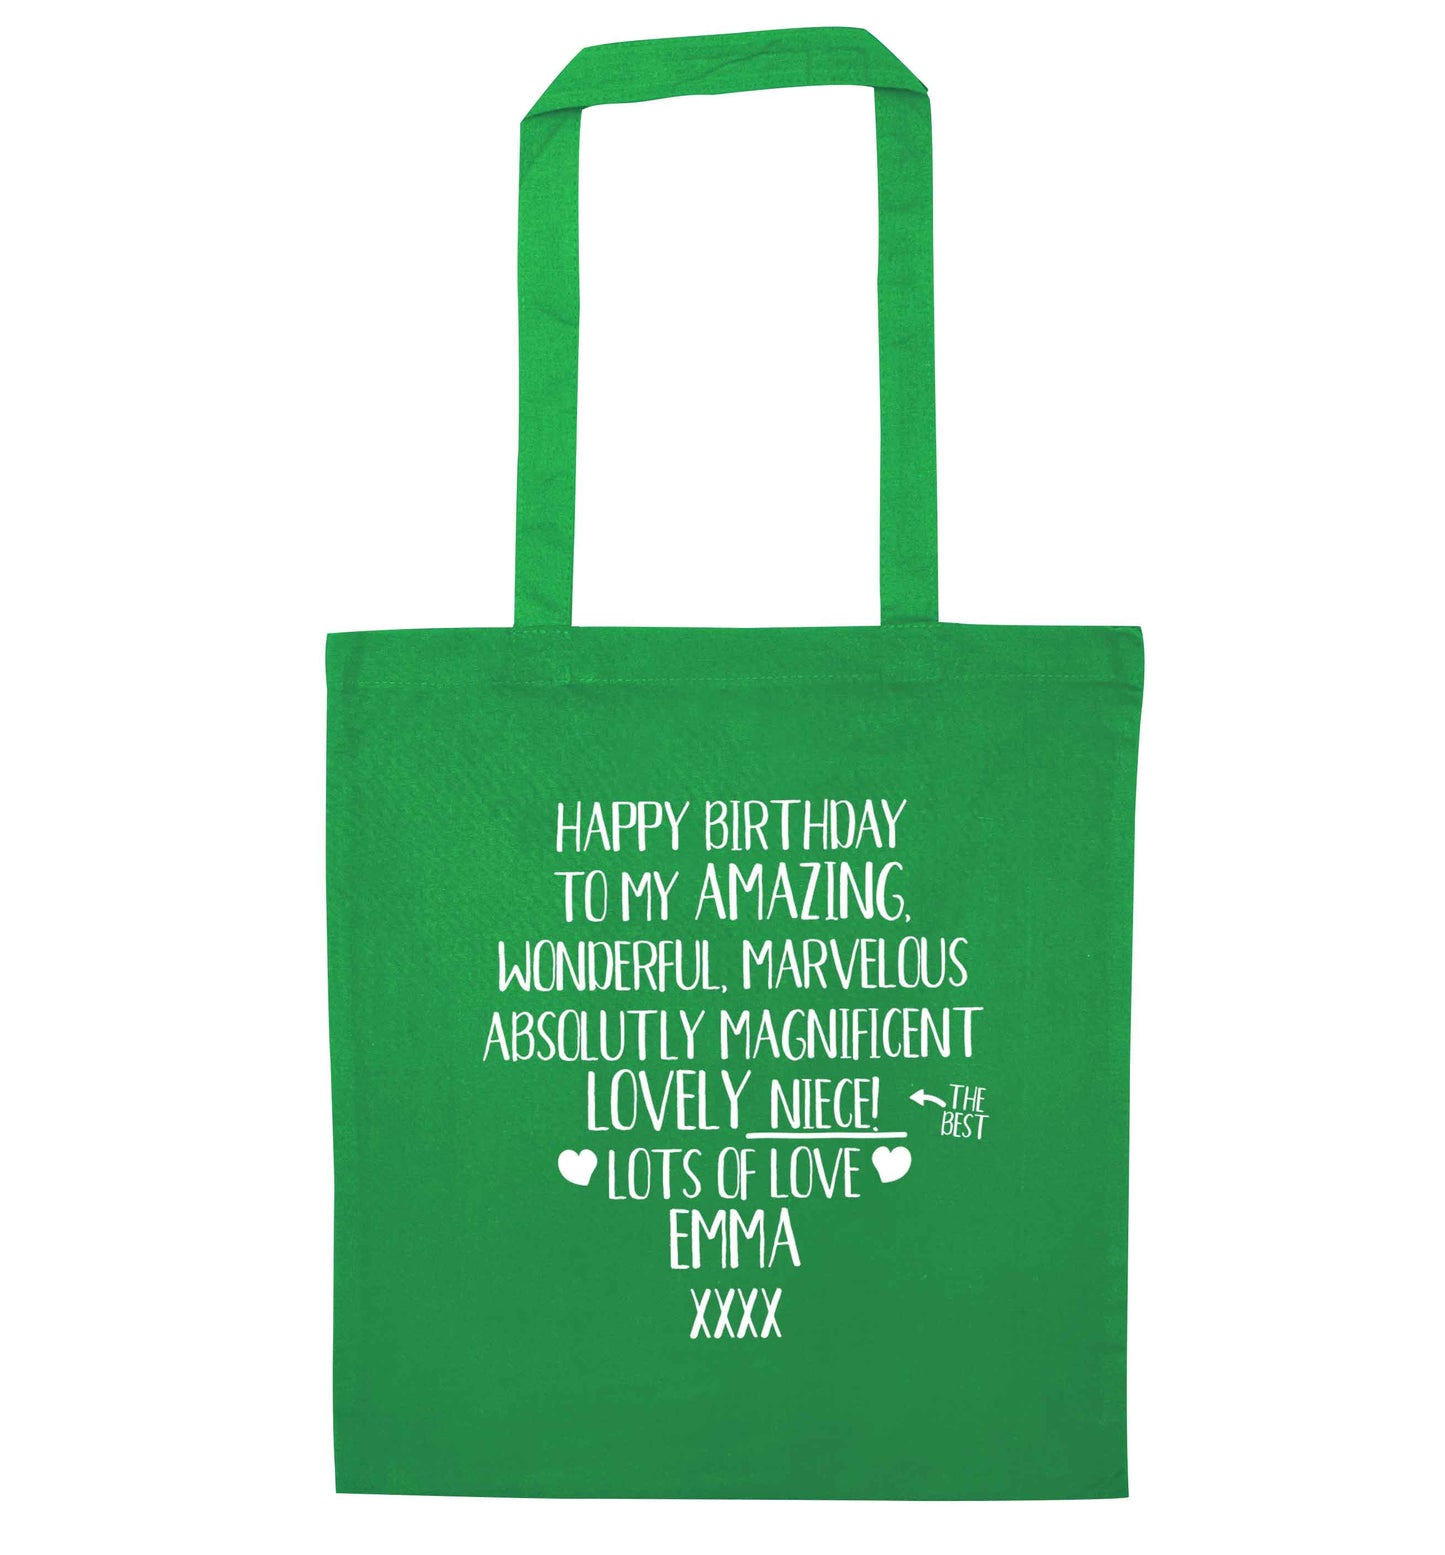 Personalised happy birthday to my amazing, wonderful, lovely niece green tote bag